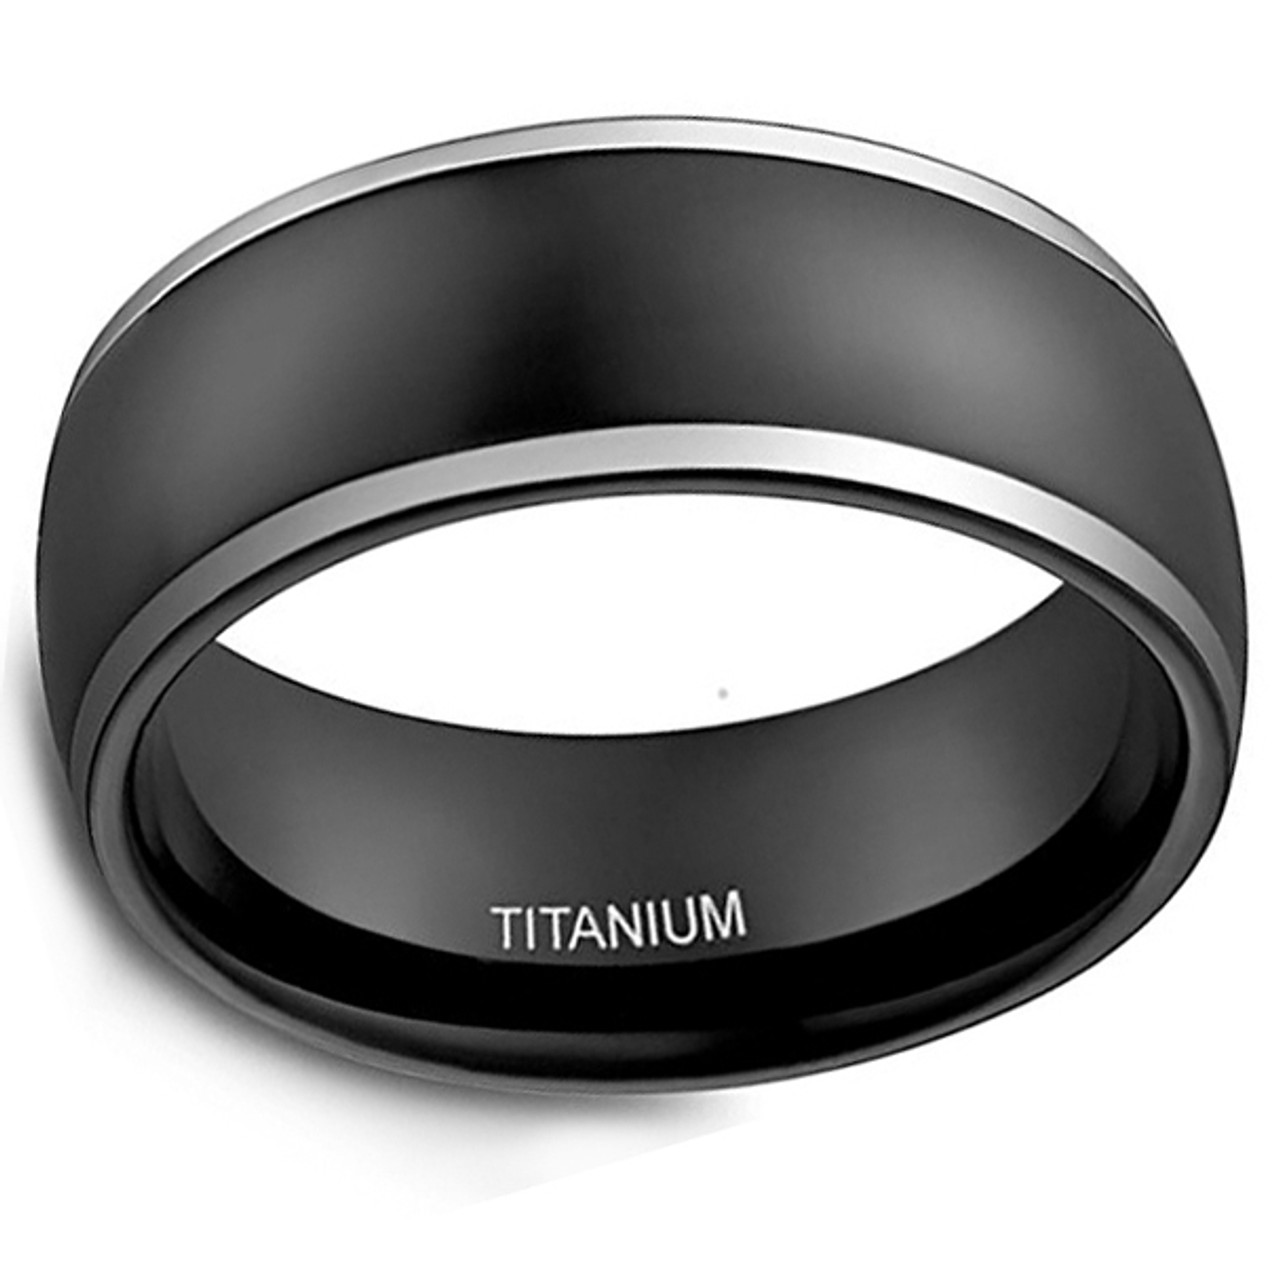 (8mm) Unisex or Men’s Titanium Wedding Ring Bands. Two Tone Black and Silver High Polish, Comfort Fit and Light Weight Ring.